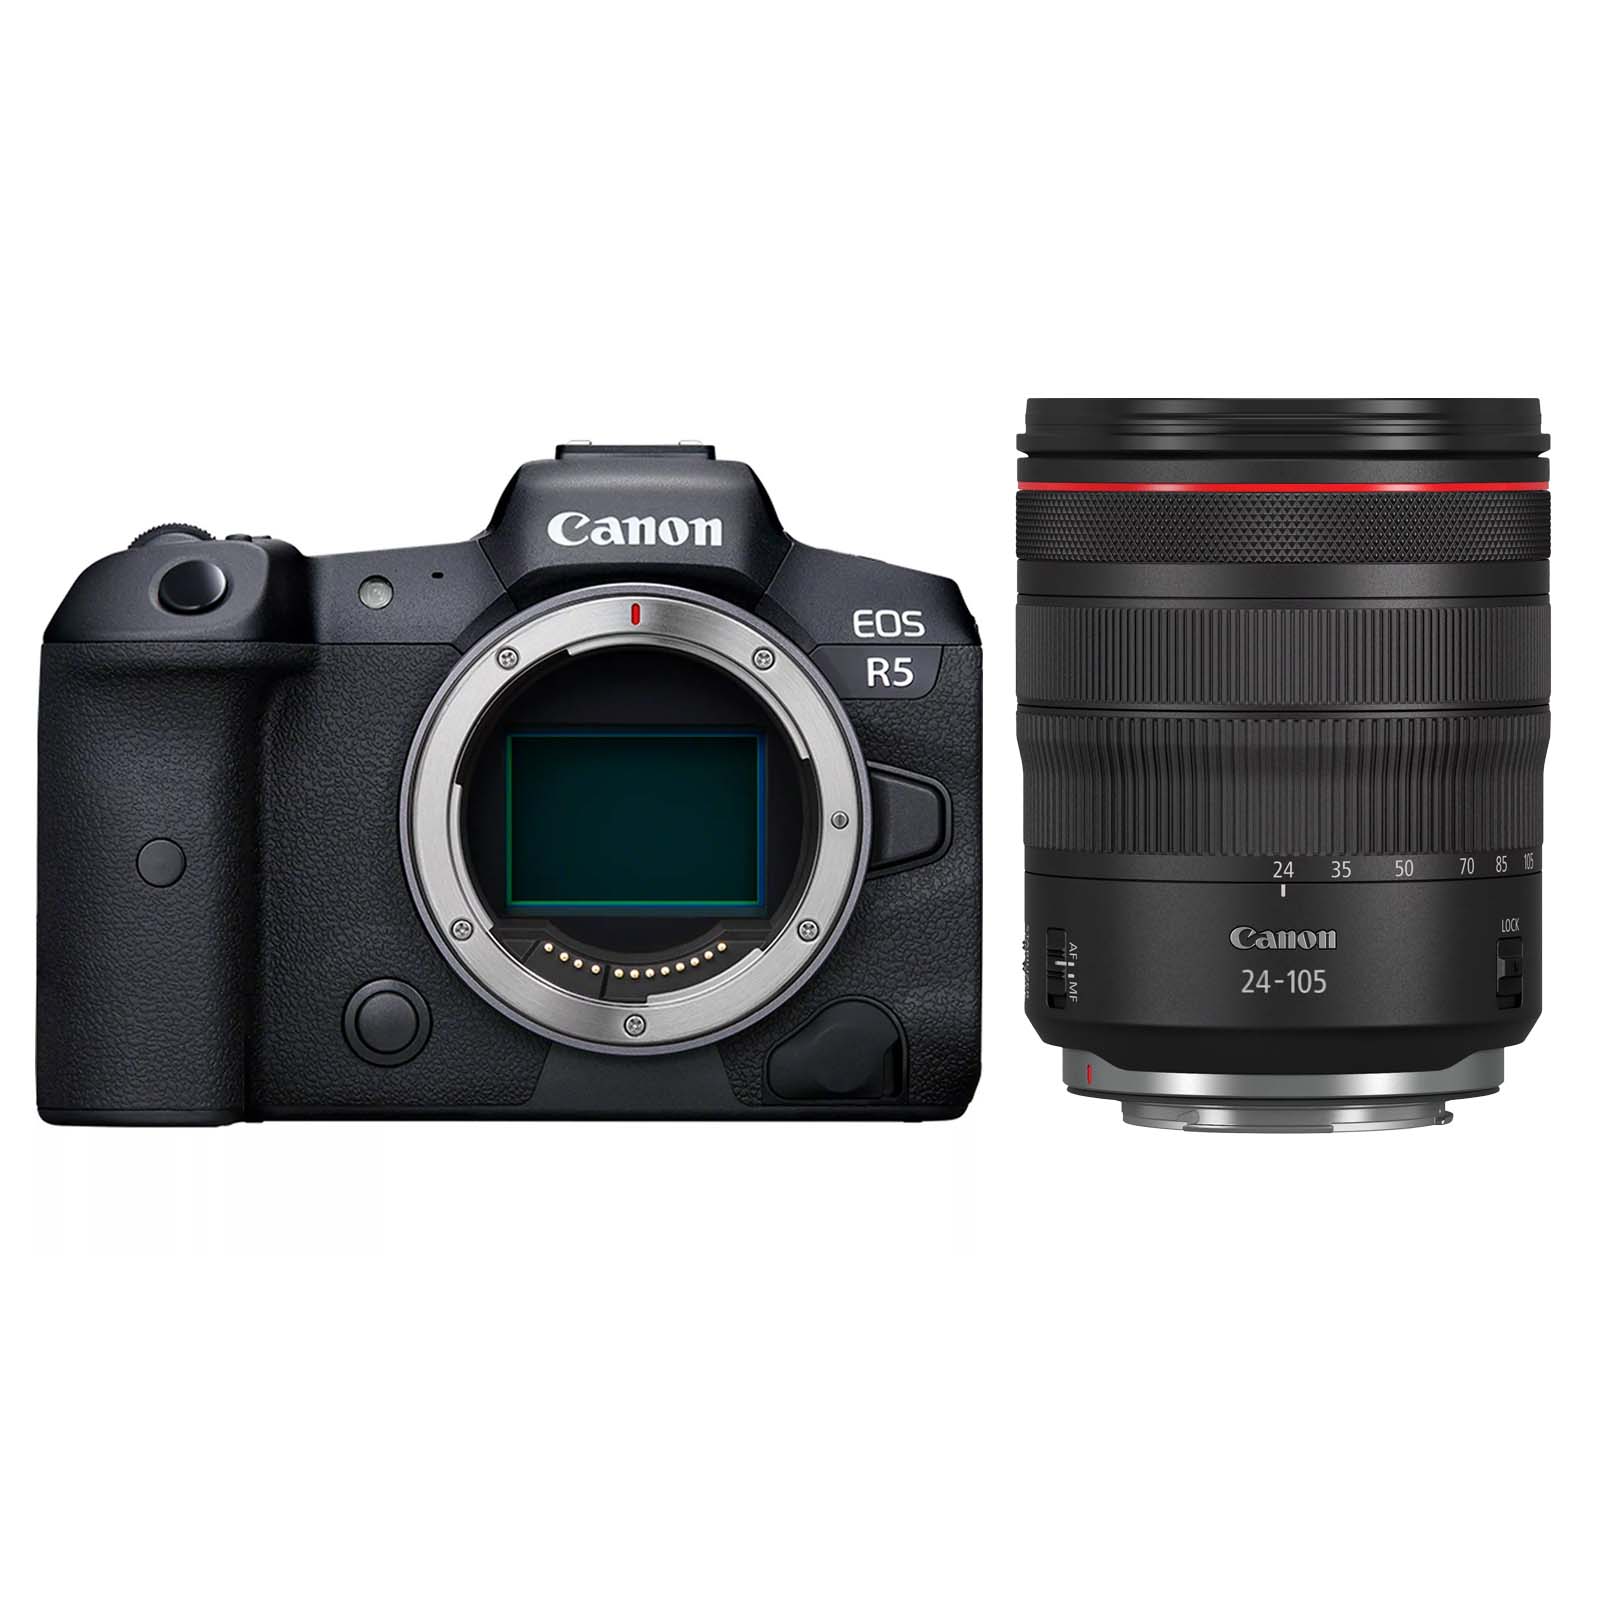 Image of Canon EOS R5 Digital Camera with 24105mm f4 L Lens